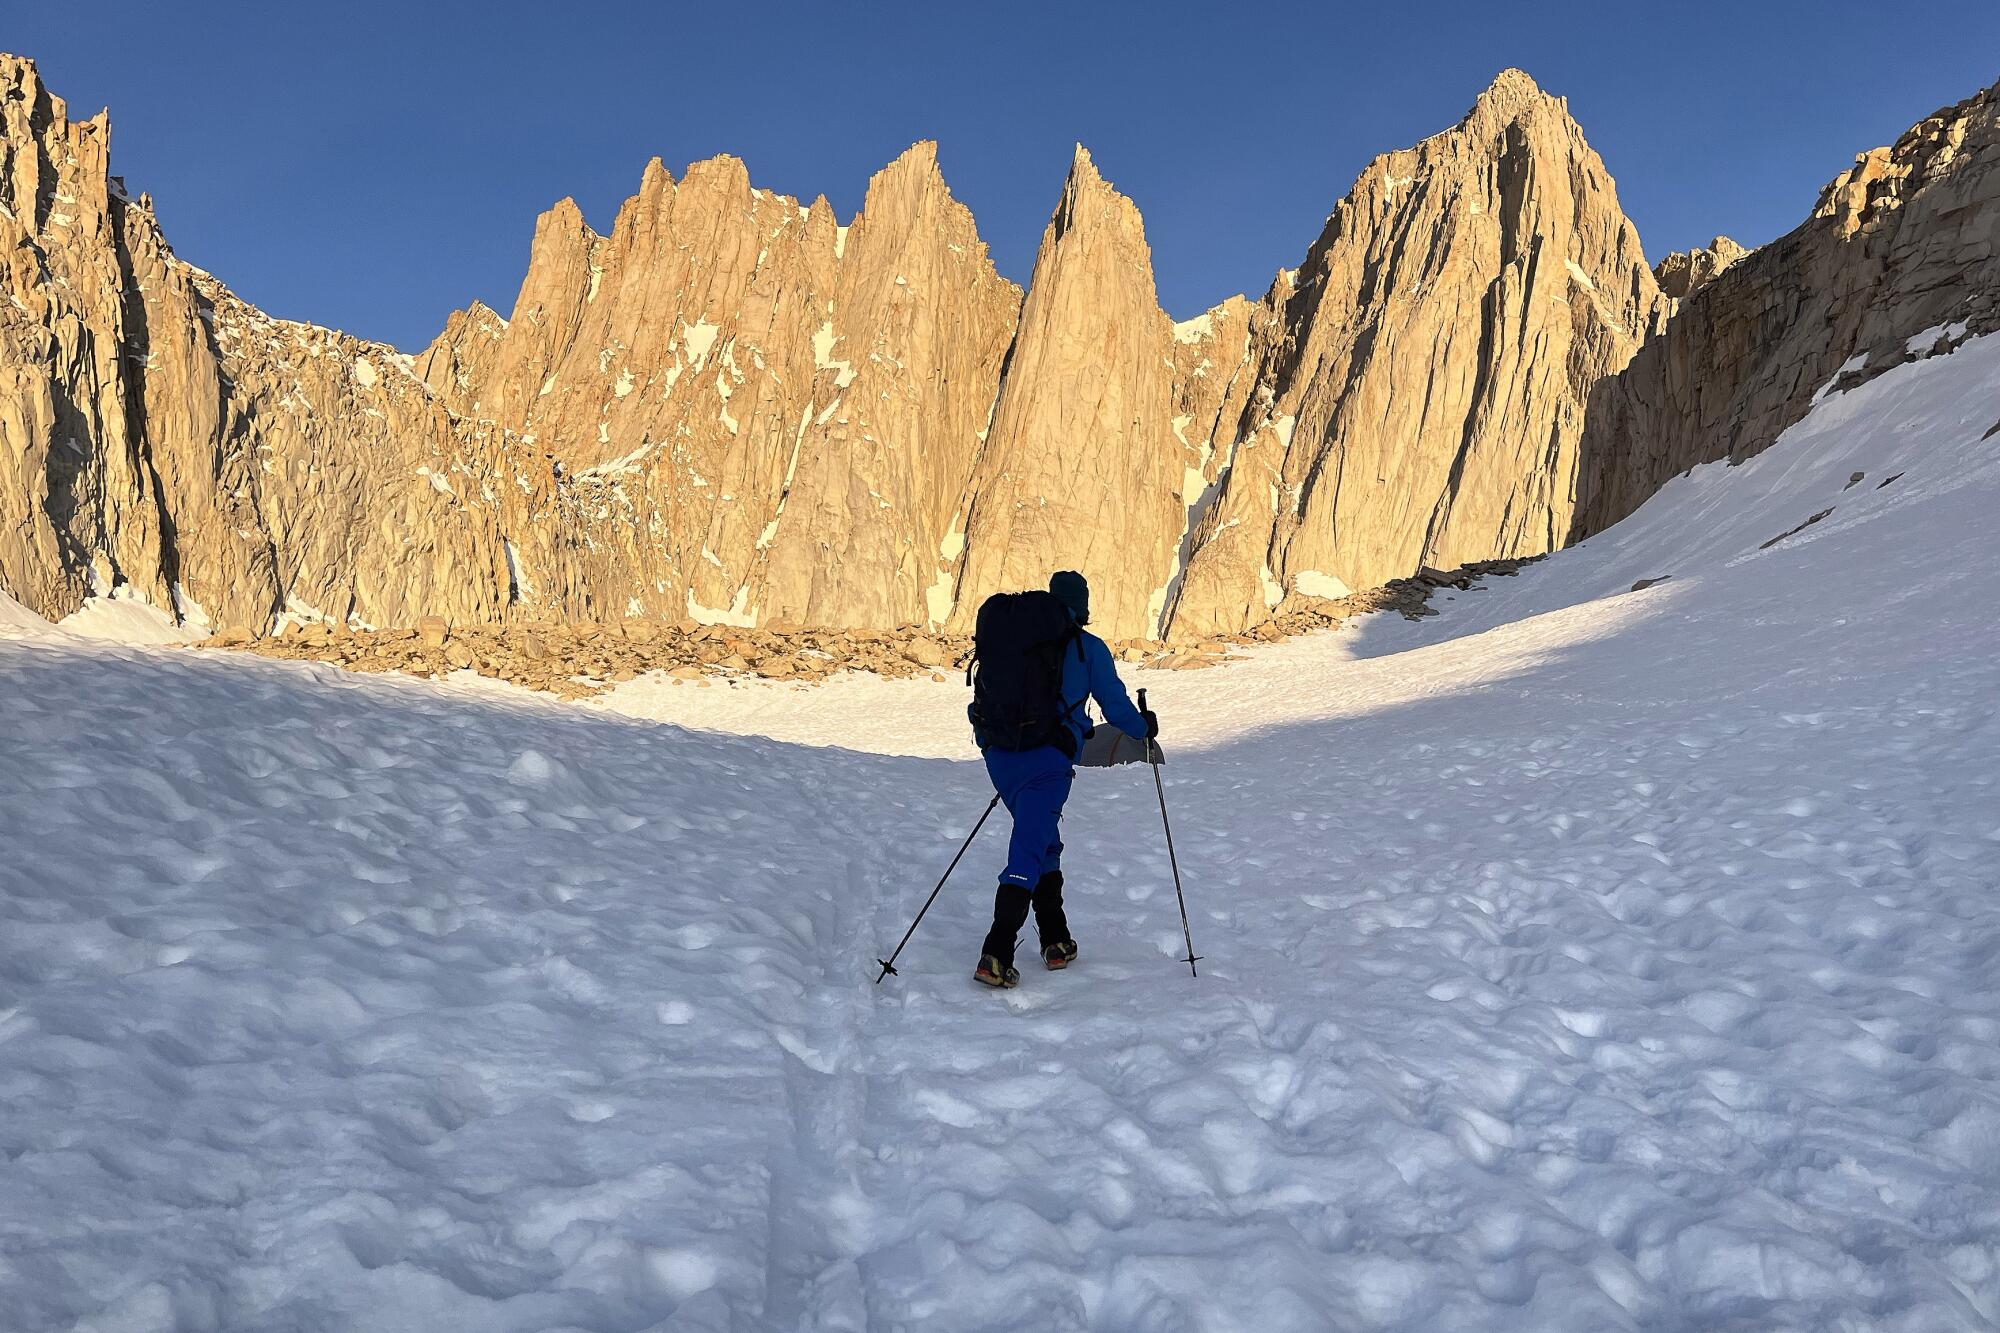 Dave Miller, owner of International Alpine Guides, climbs at dawn toward the summit of Mt. Whitney.